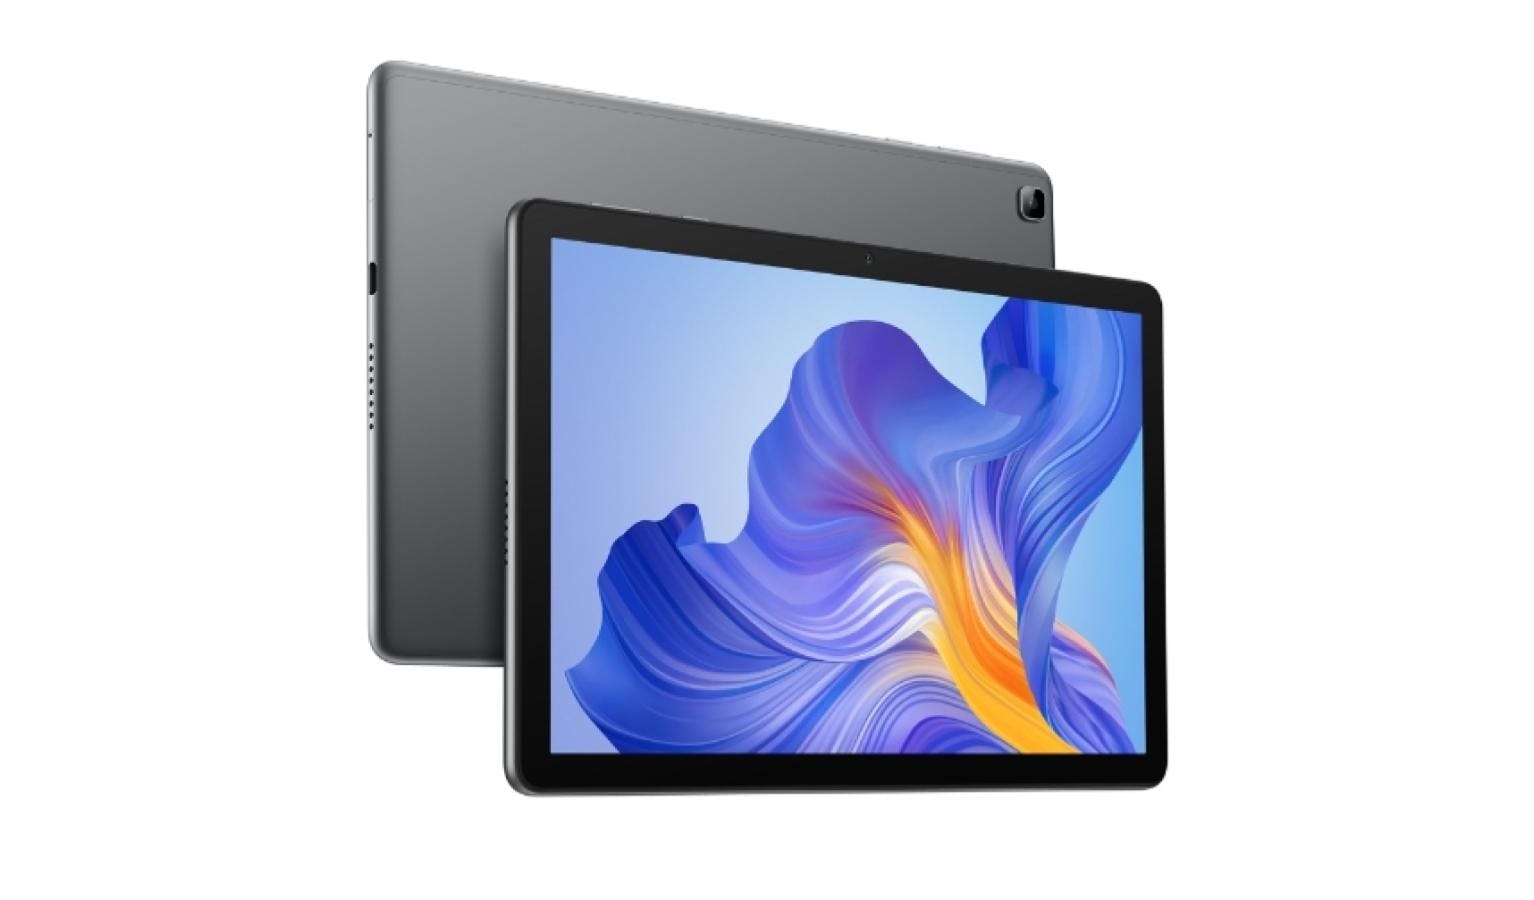 Honor Pad X8 LTE (4GB+64GB) 10.1-inch Tablet - Space Grey | Harvey Norman  Malaysia